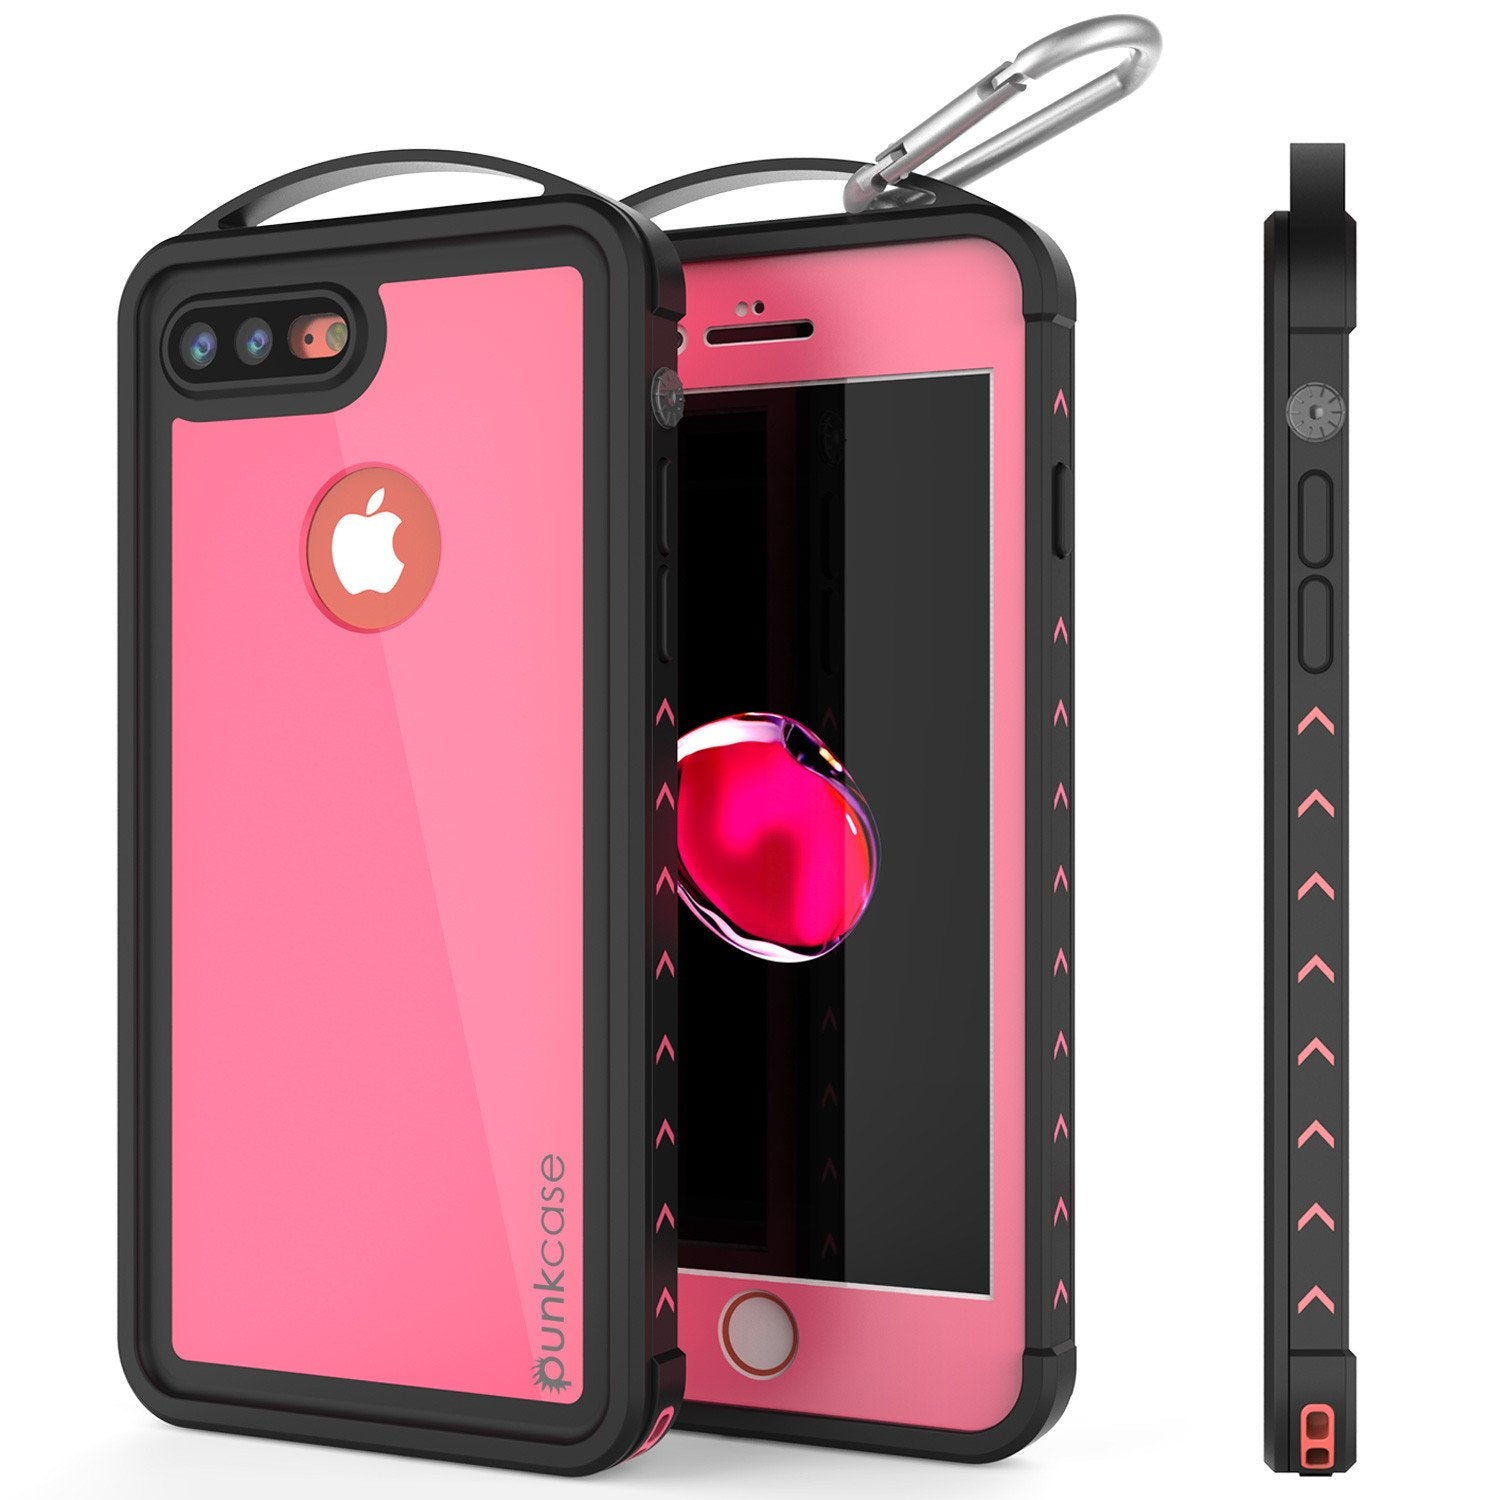 iPhone 7+ Plus Waterproof Case, Punkcase ALPINE Series, Pink | Heavy Duty Armor Cover (Color in image: pink)